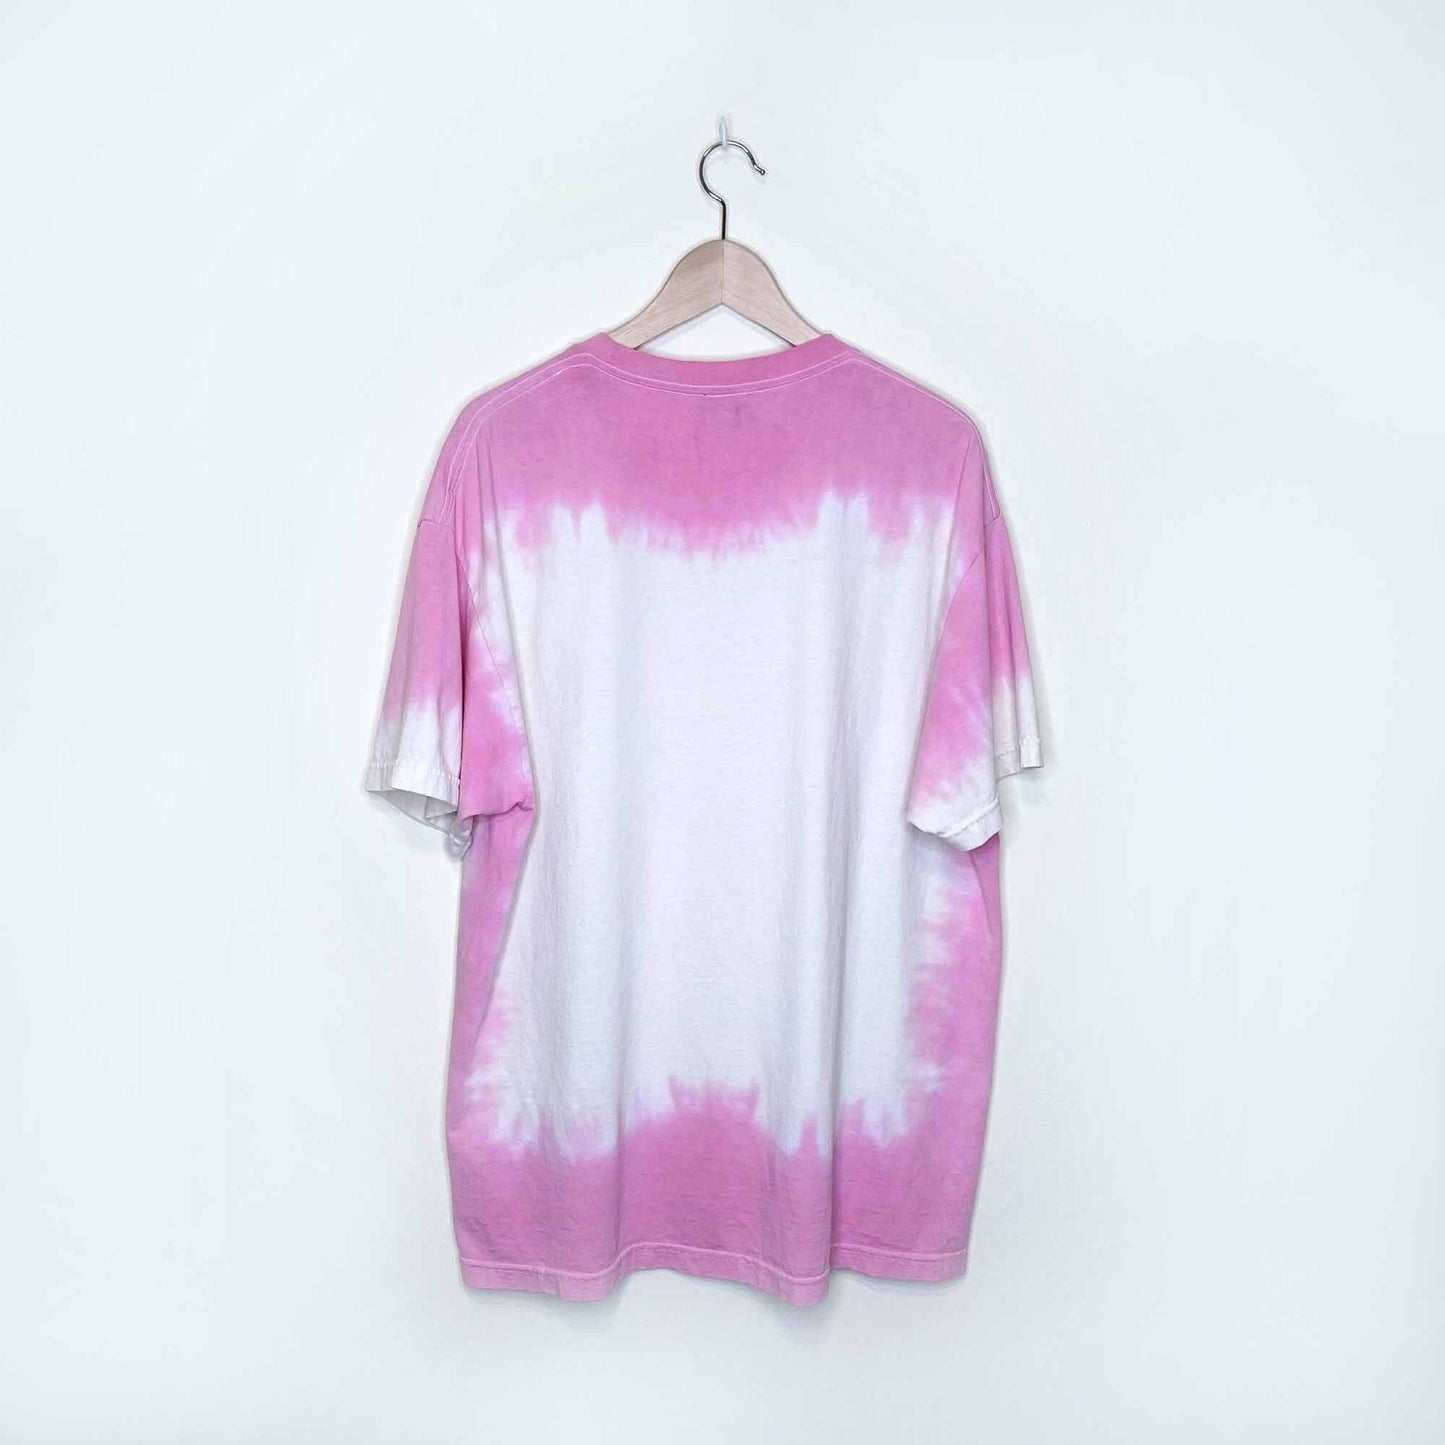 UO day rolling stones 94/95 tour tie dye oversized tee - size sm/med